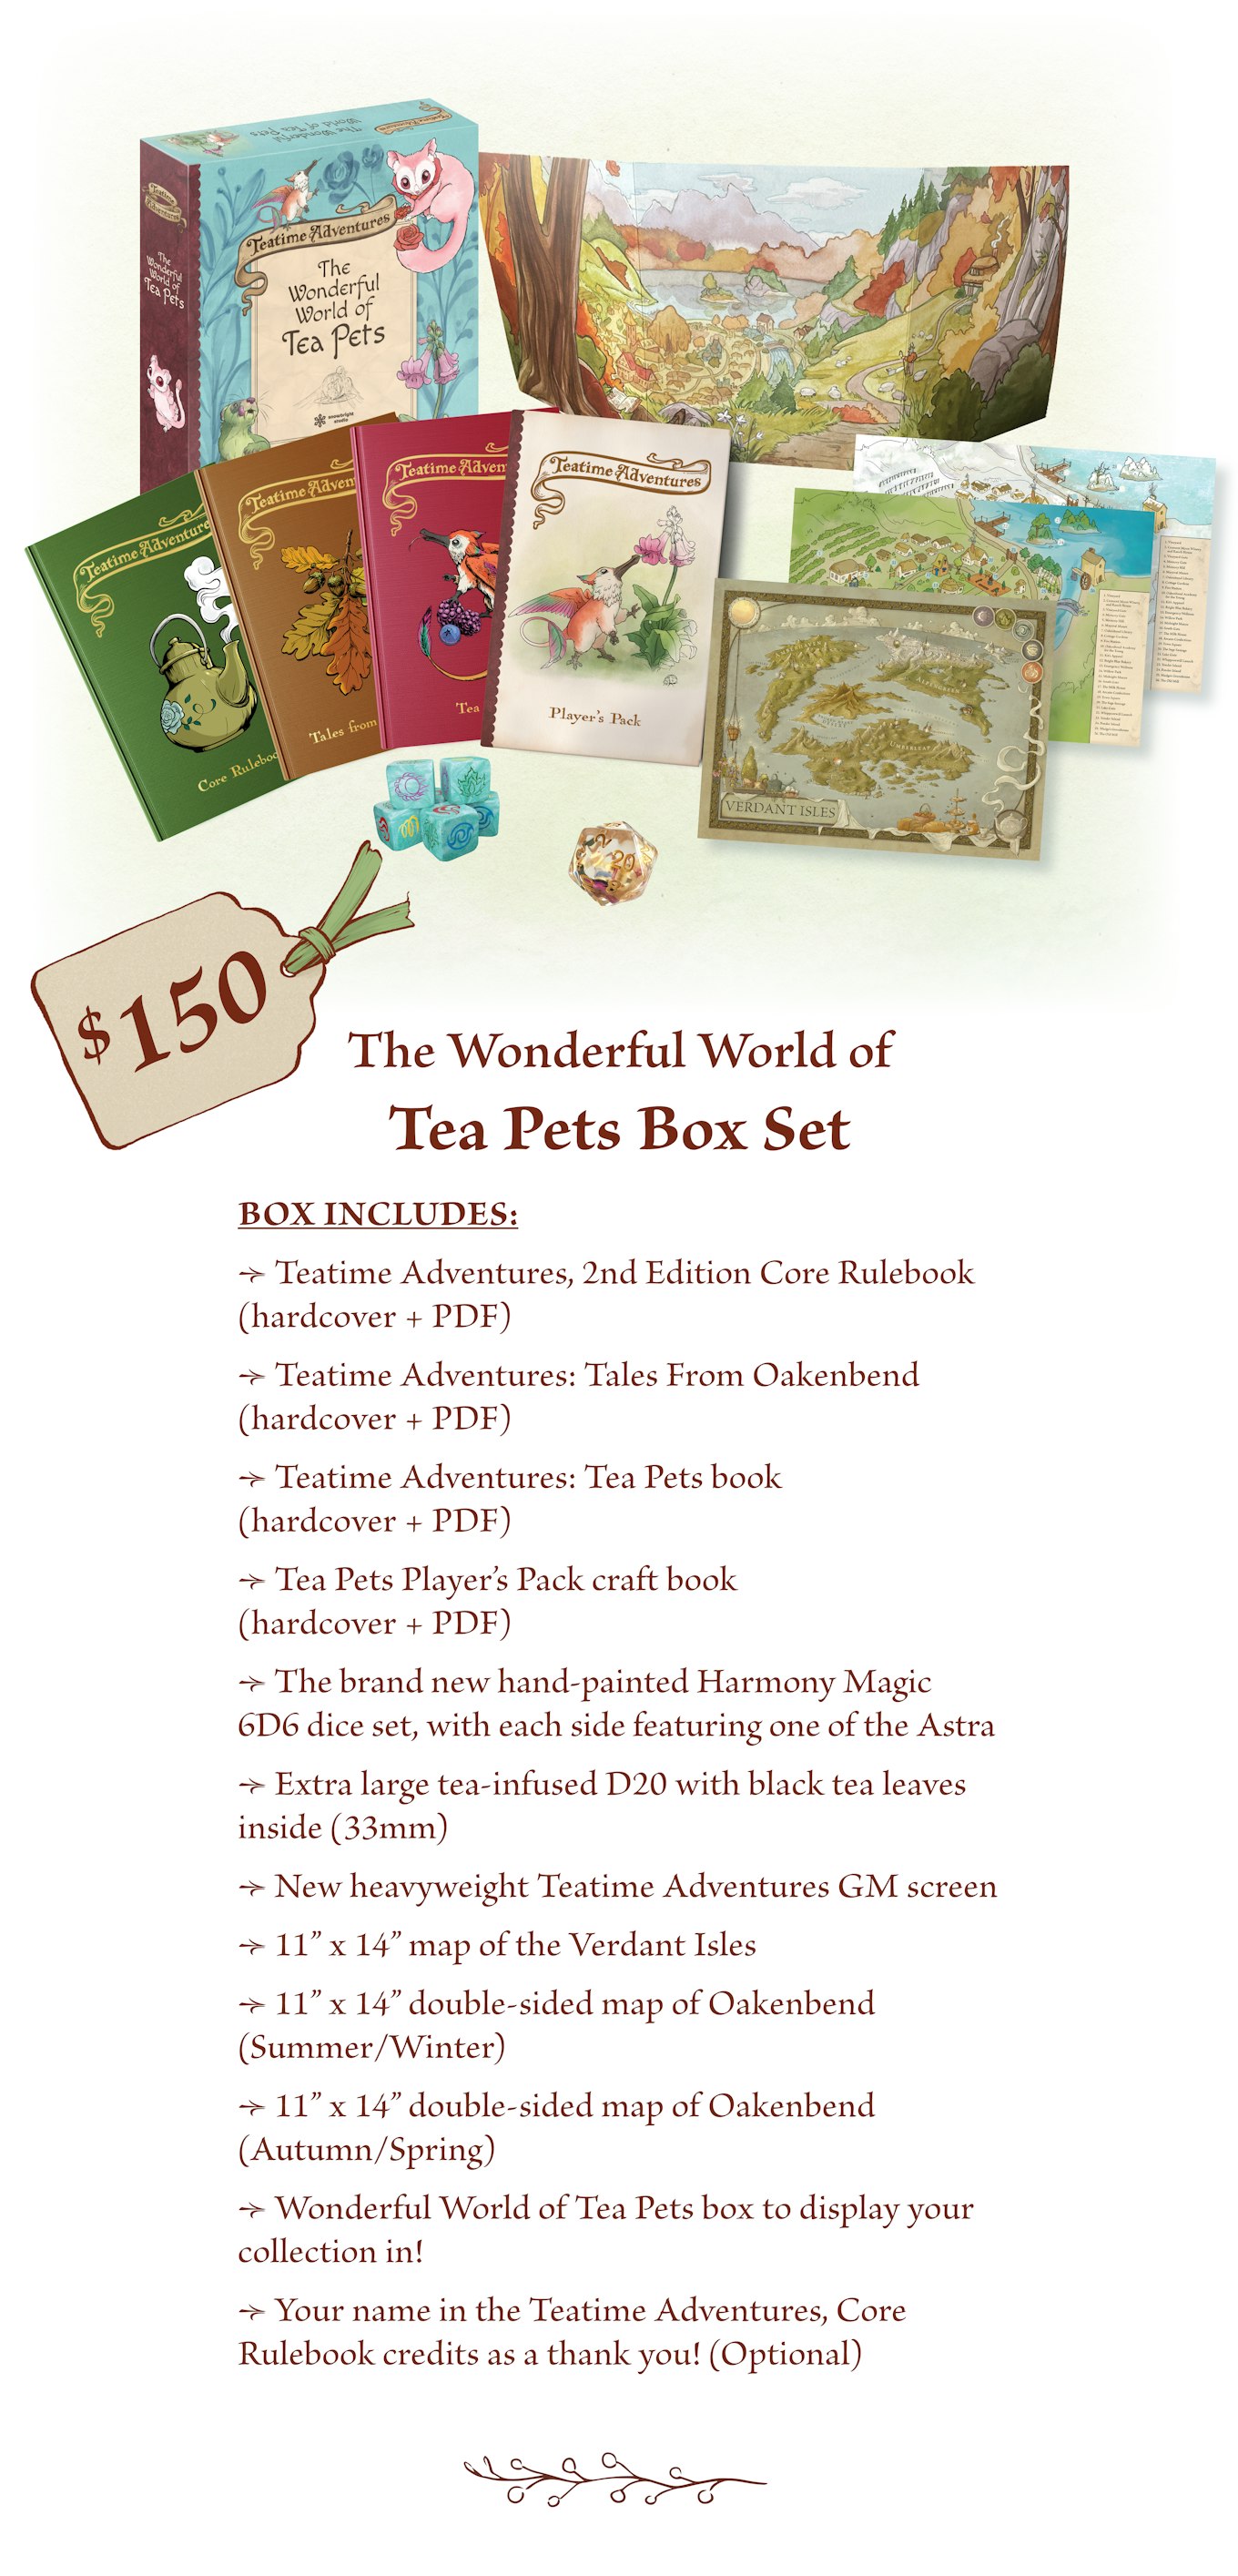 $150 - The Wonderful World of Tea Pets Box Set includes: Teatime Adventures, Core Rulebook 2E (hardcover + PDF) Teatime Adventures: Tales from Oakenbend (hardcover + PDF) Teatime Adventures: Tea Pets (hardcover + PDF). Tea Pets Player’s Pack craft book (craft book + PDF). The brand new official hand-painted Harmony Magic dice set, with each side featuring one of the Astra.  Extra large tea-infused D20 with black tea leaves inside (33mm).  New heavyweight Teatime Adventures GM screen.  11” x 14” map of the Verdant Isles. 11” x 14” double-sided map of Oakenbend (Summer/Winter). 11” x 14” double-sided map of Oakenbend (Autumn/Spring). Wonderful World of Tea Pets box to display your collection in* Your name in the Teatime Adventures, Core Rulebook credits as a thank you! (Optional) 